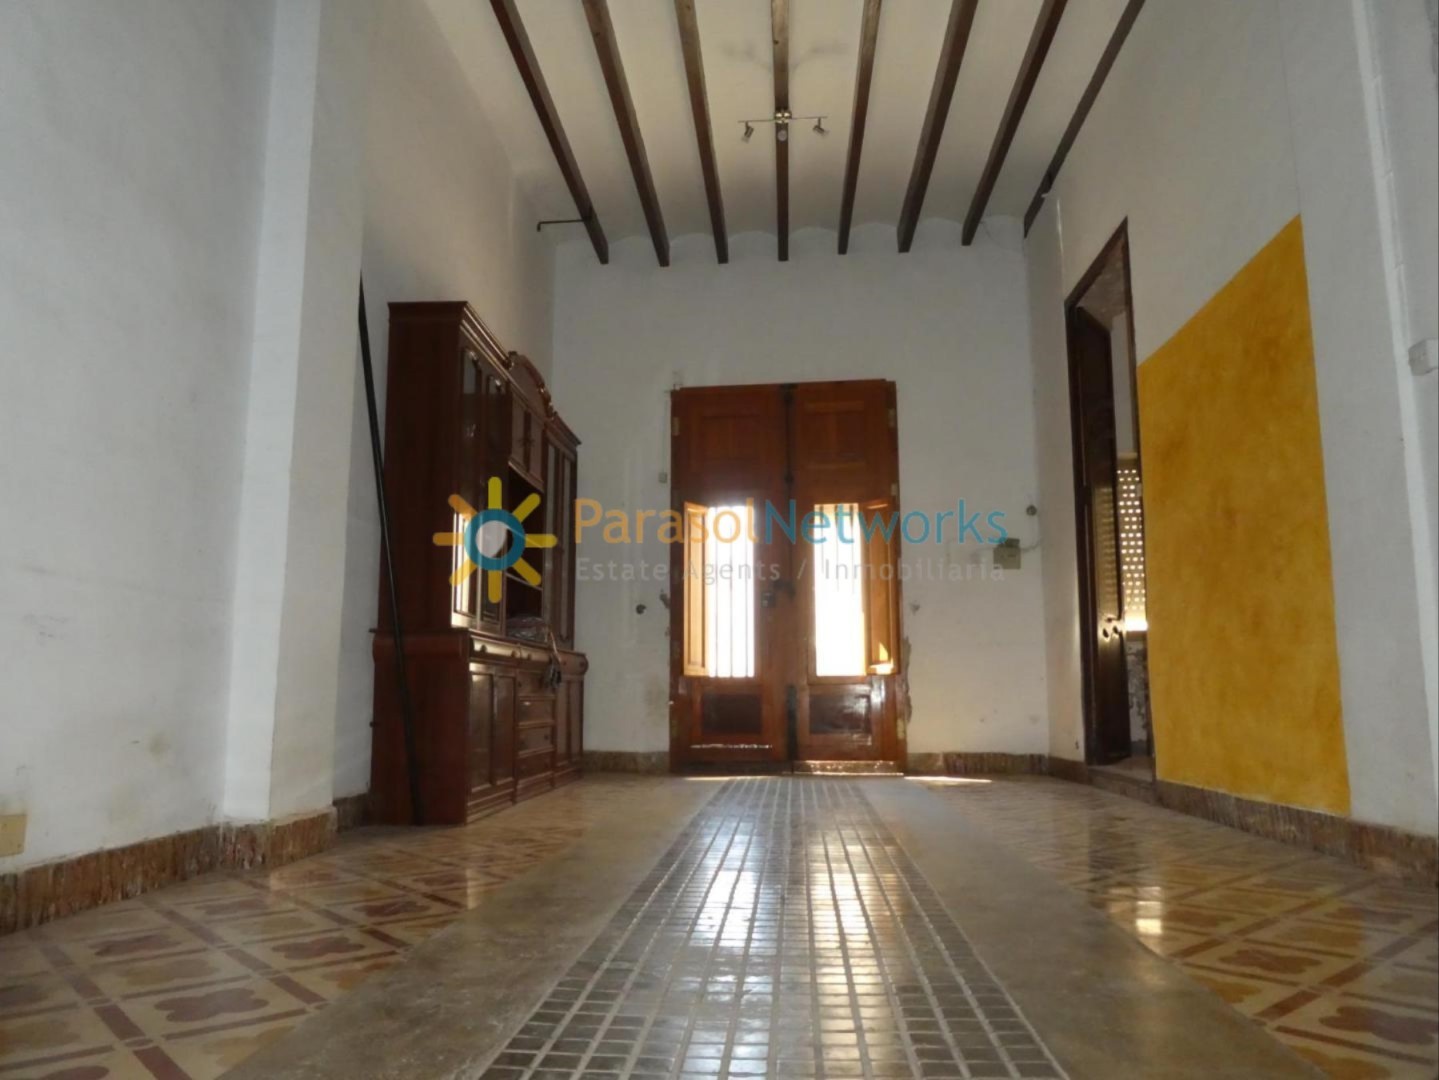 House for sale in Oliva- Ref:1988